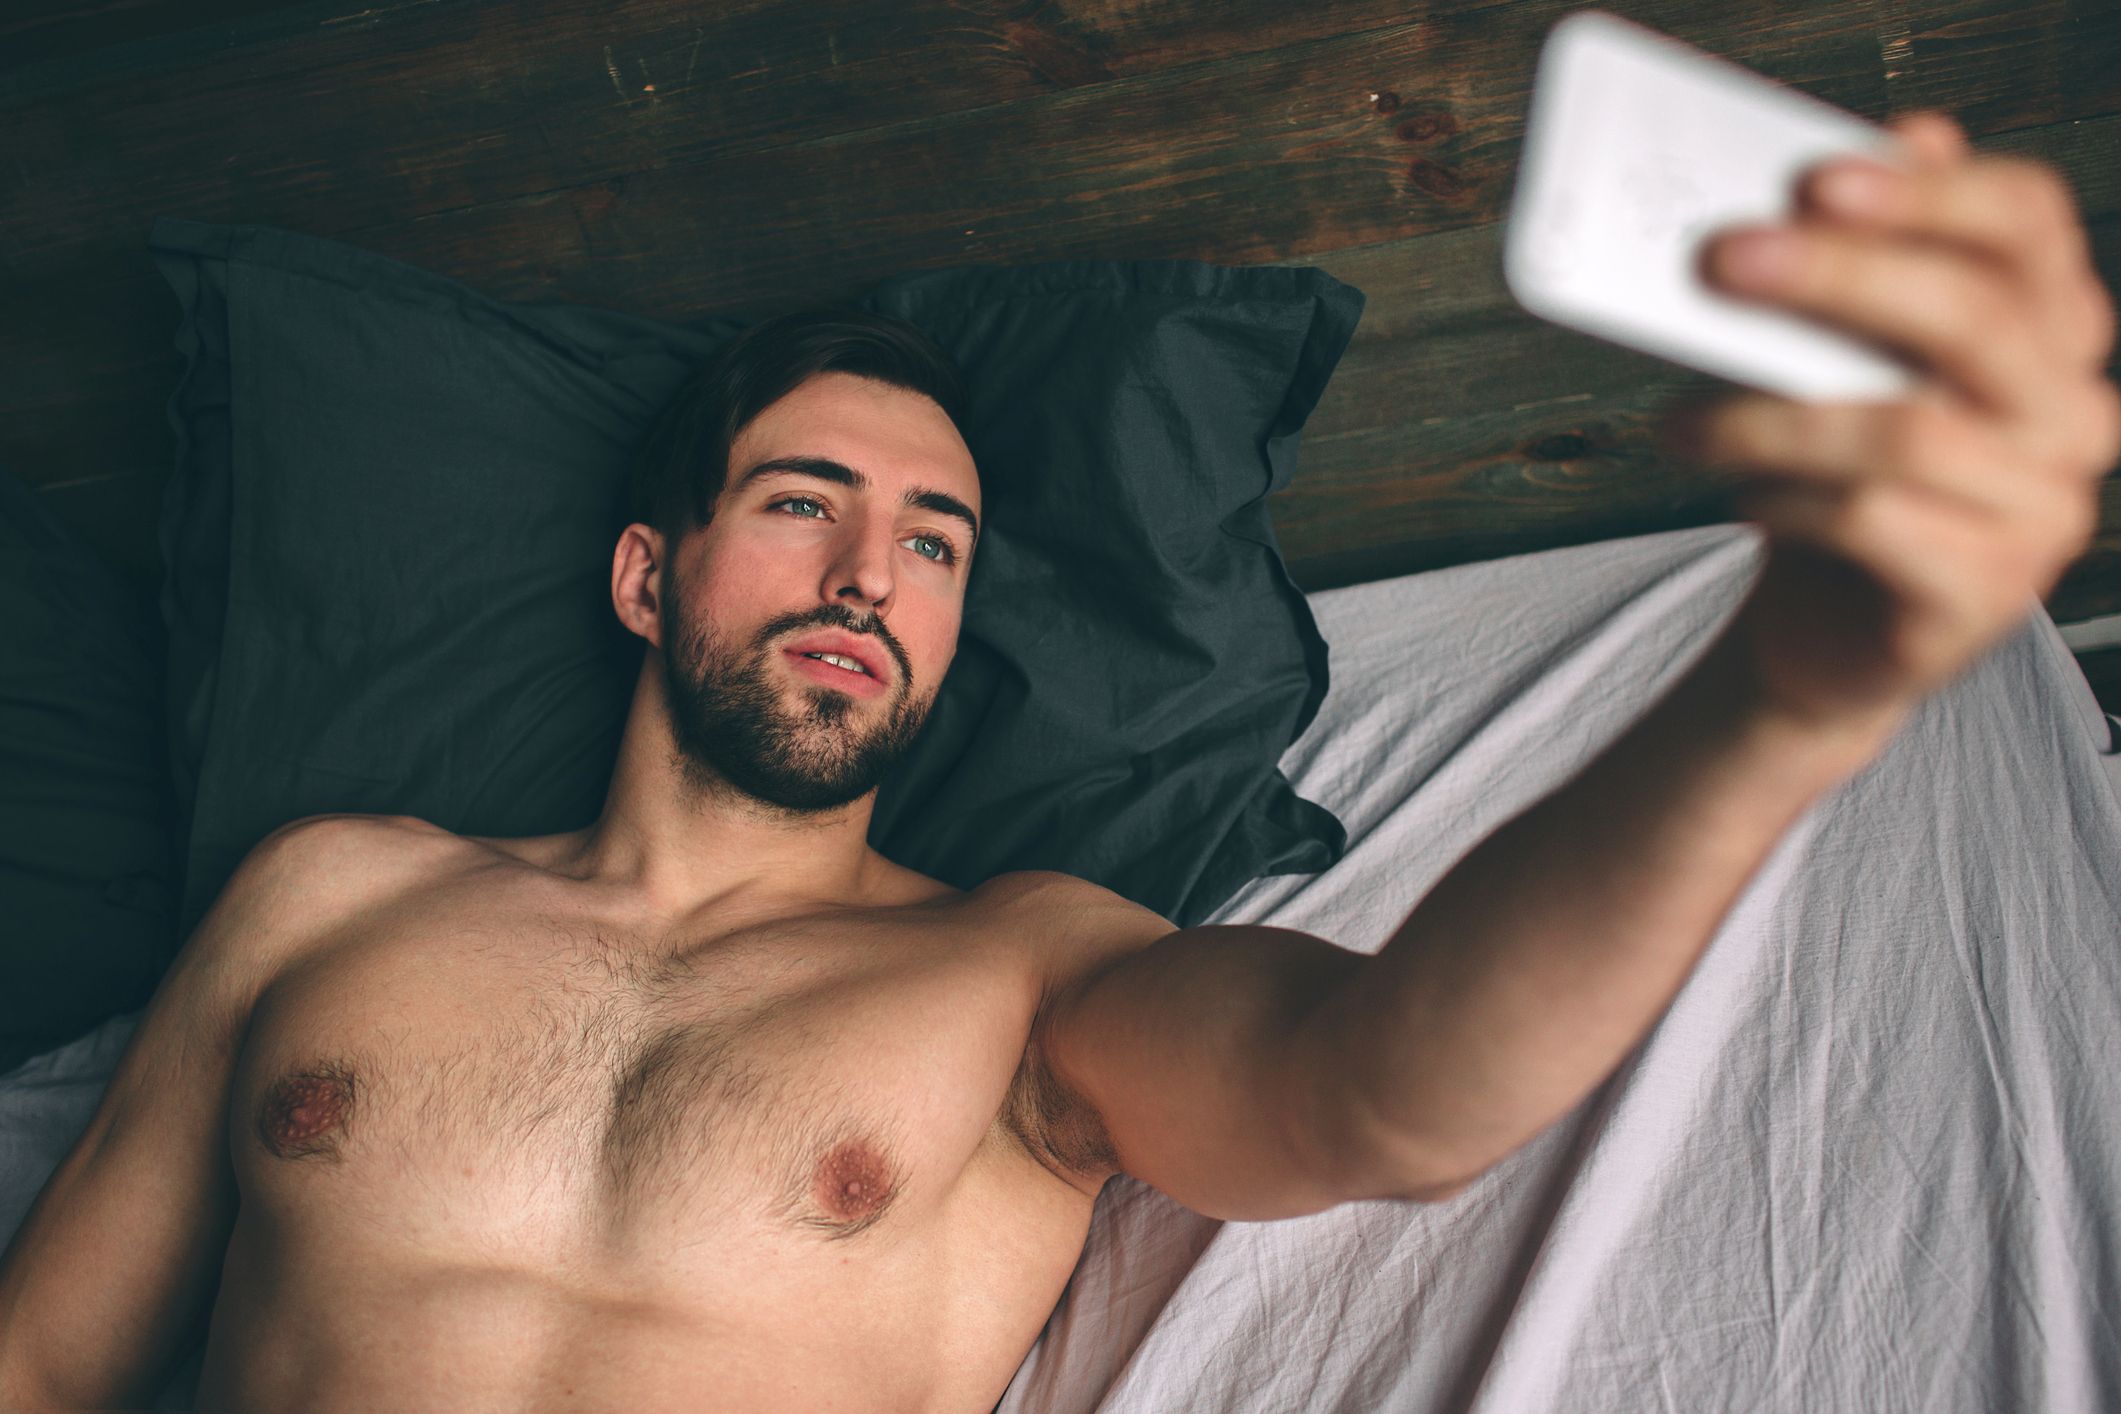 How to Take a Good Dick Pic 10 Tips From Sex Experts